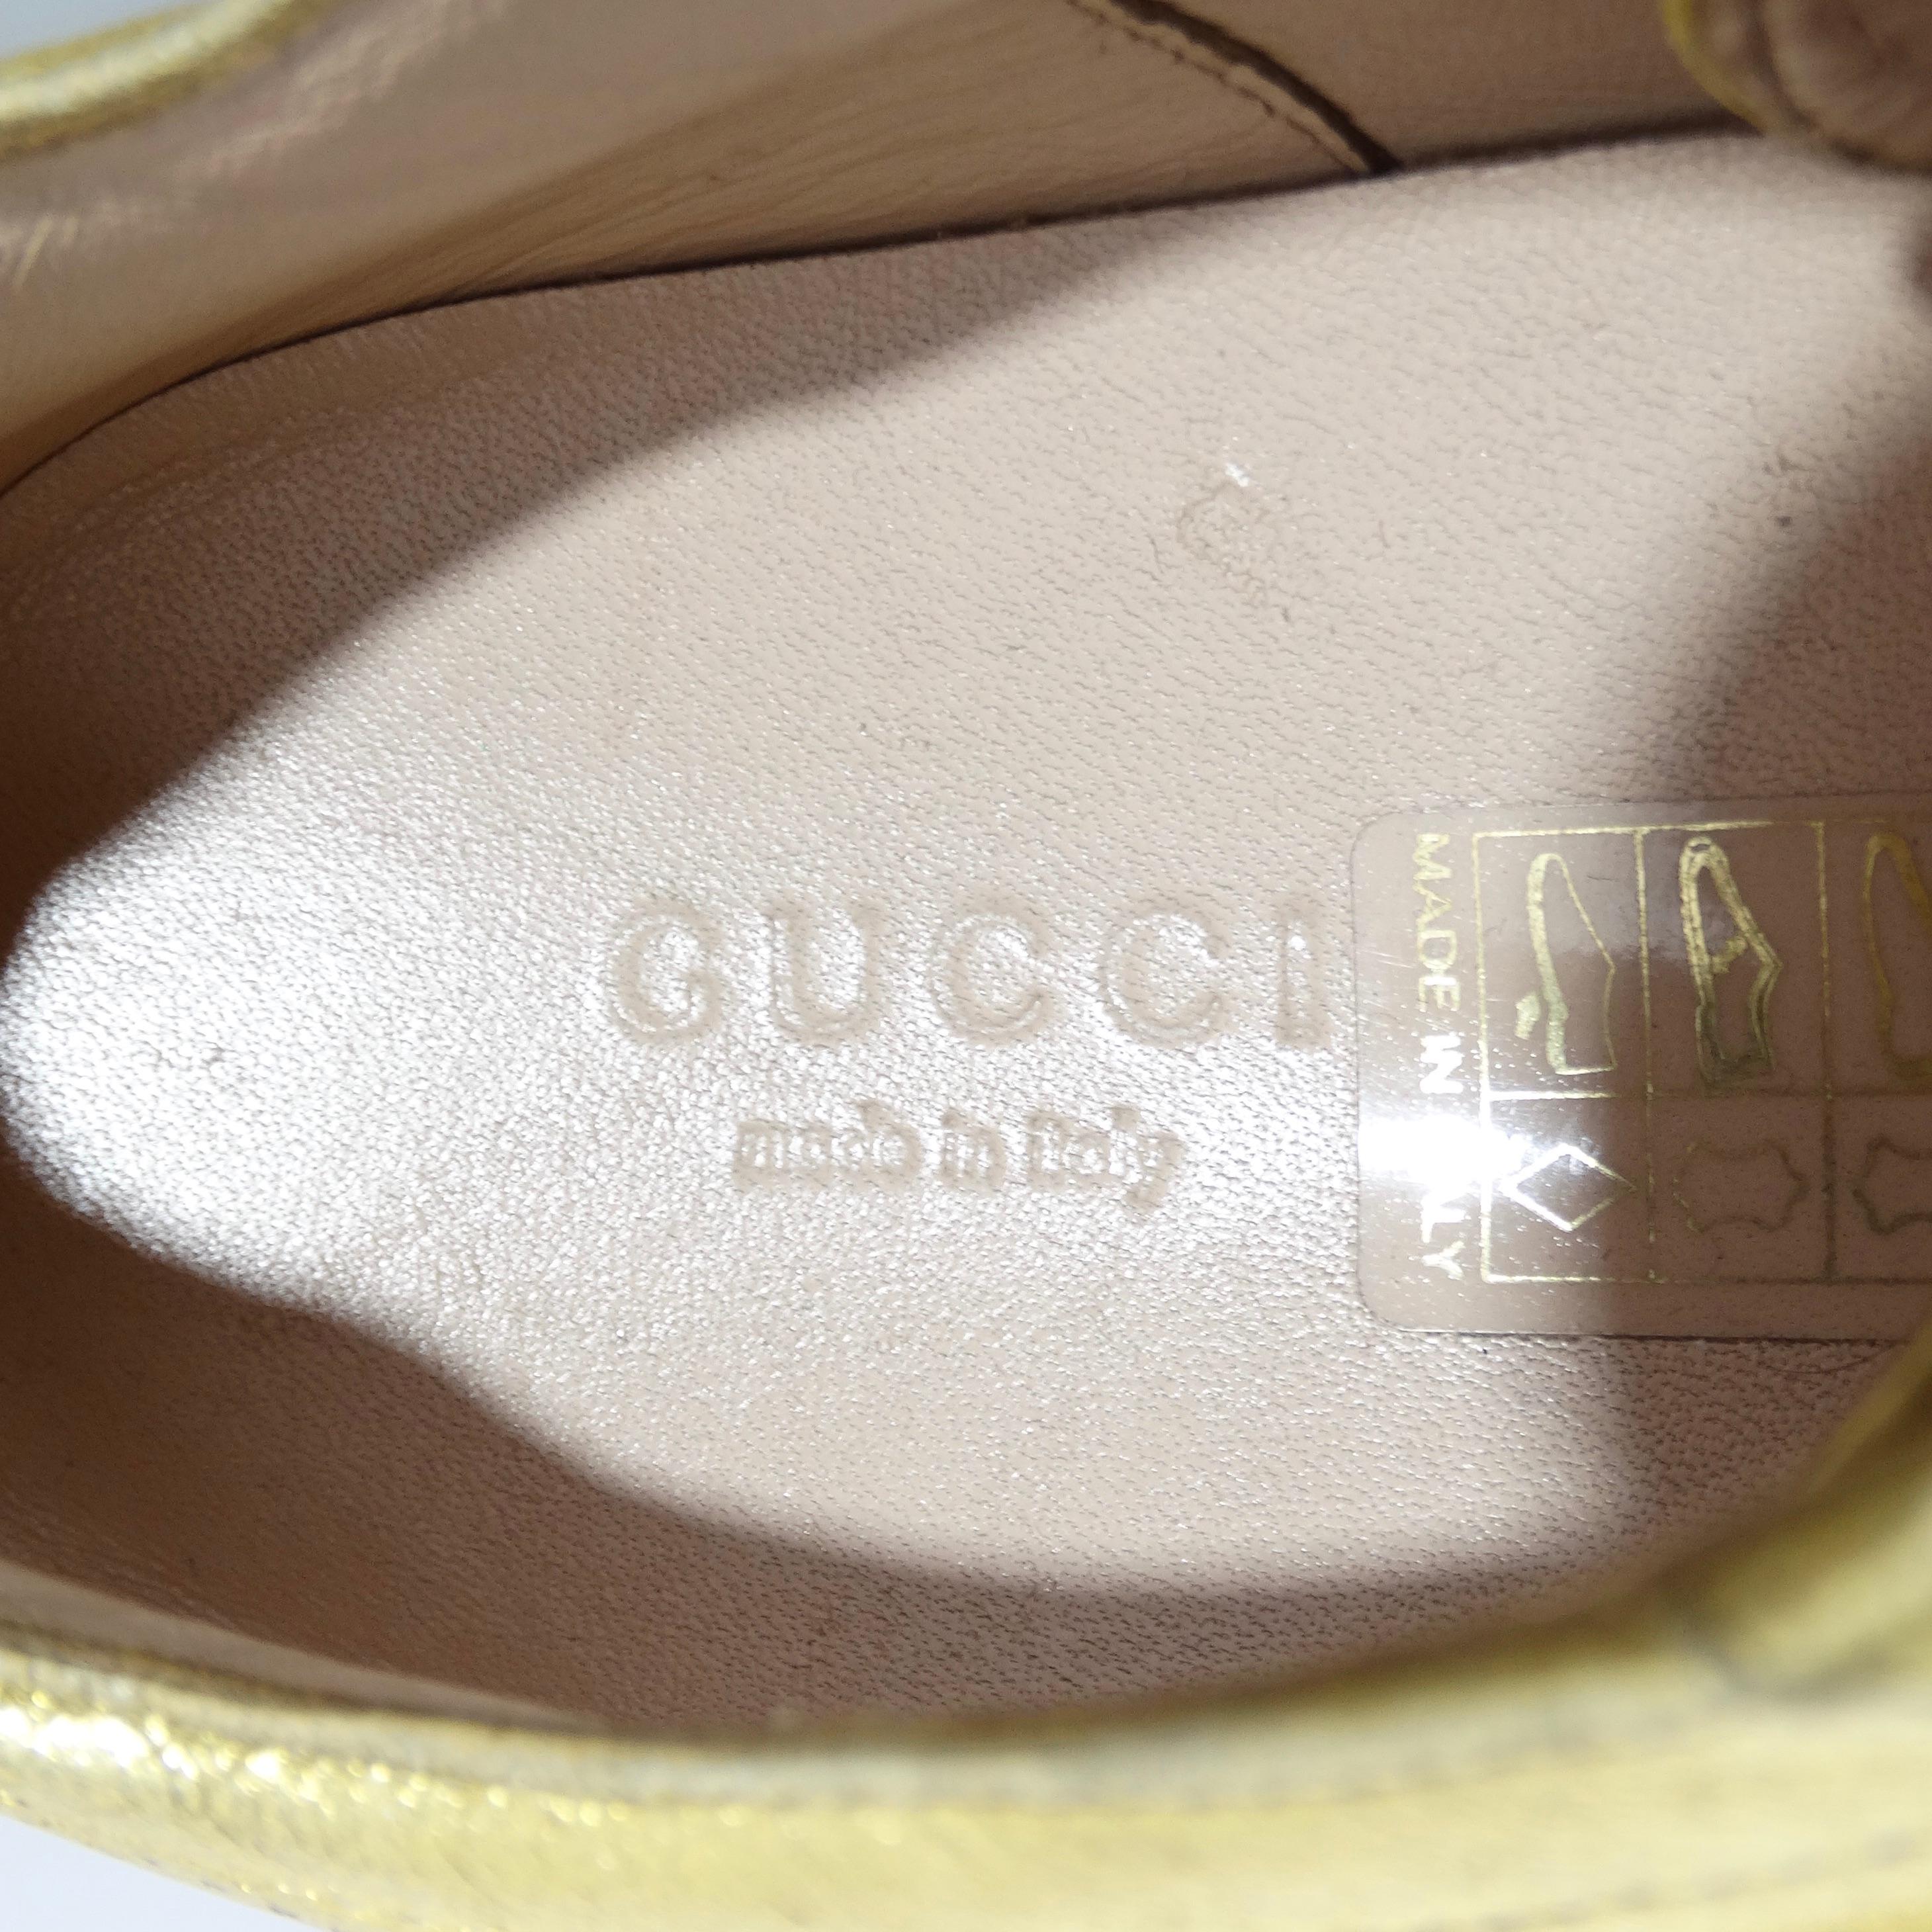 Gucci Peggy Rainbow Platform Sneakers In Excellent Condition For Sale In Scottsdale, AZ